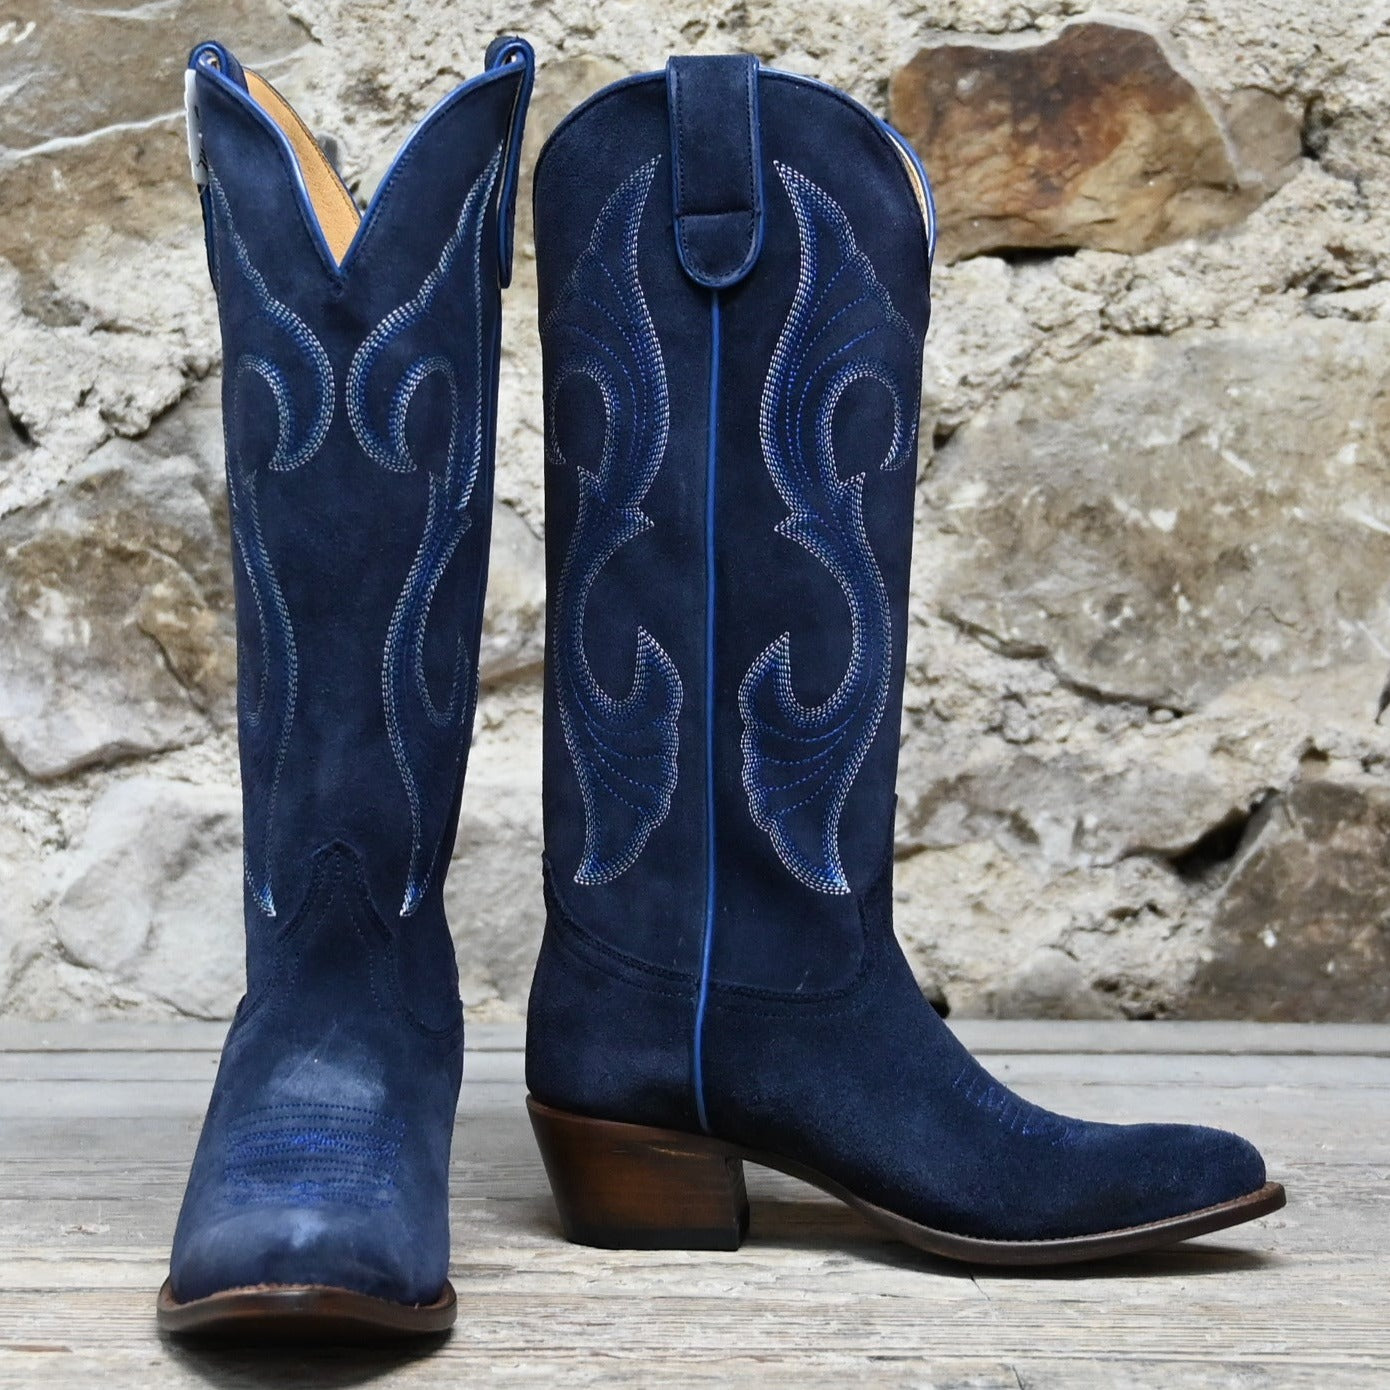 Macie Bean Midnight in Paris Boots in Marine Blue Suede view of front and side